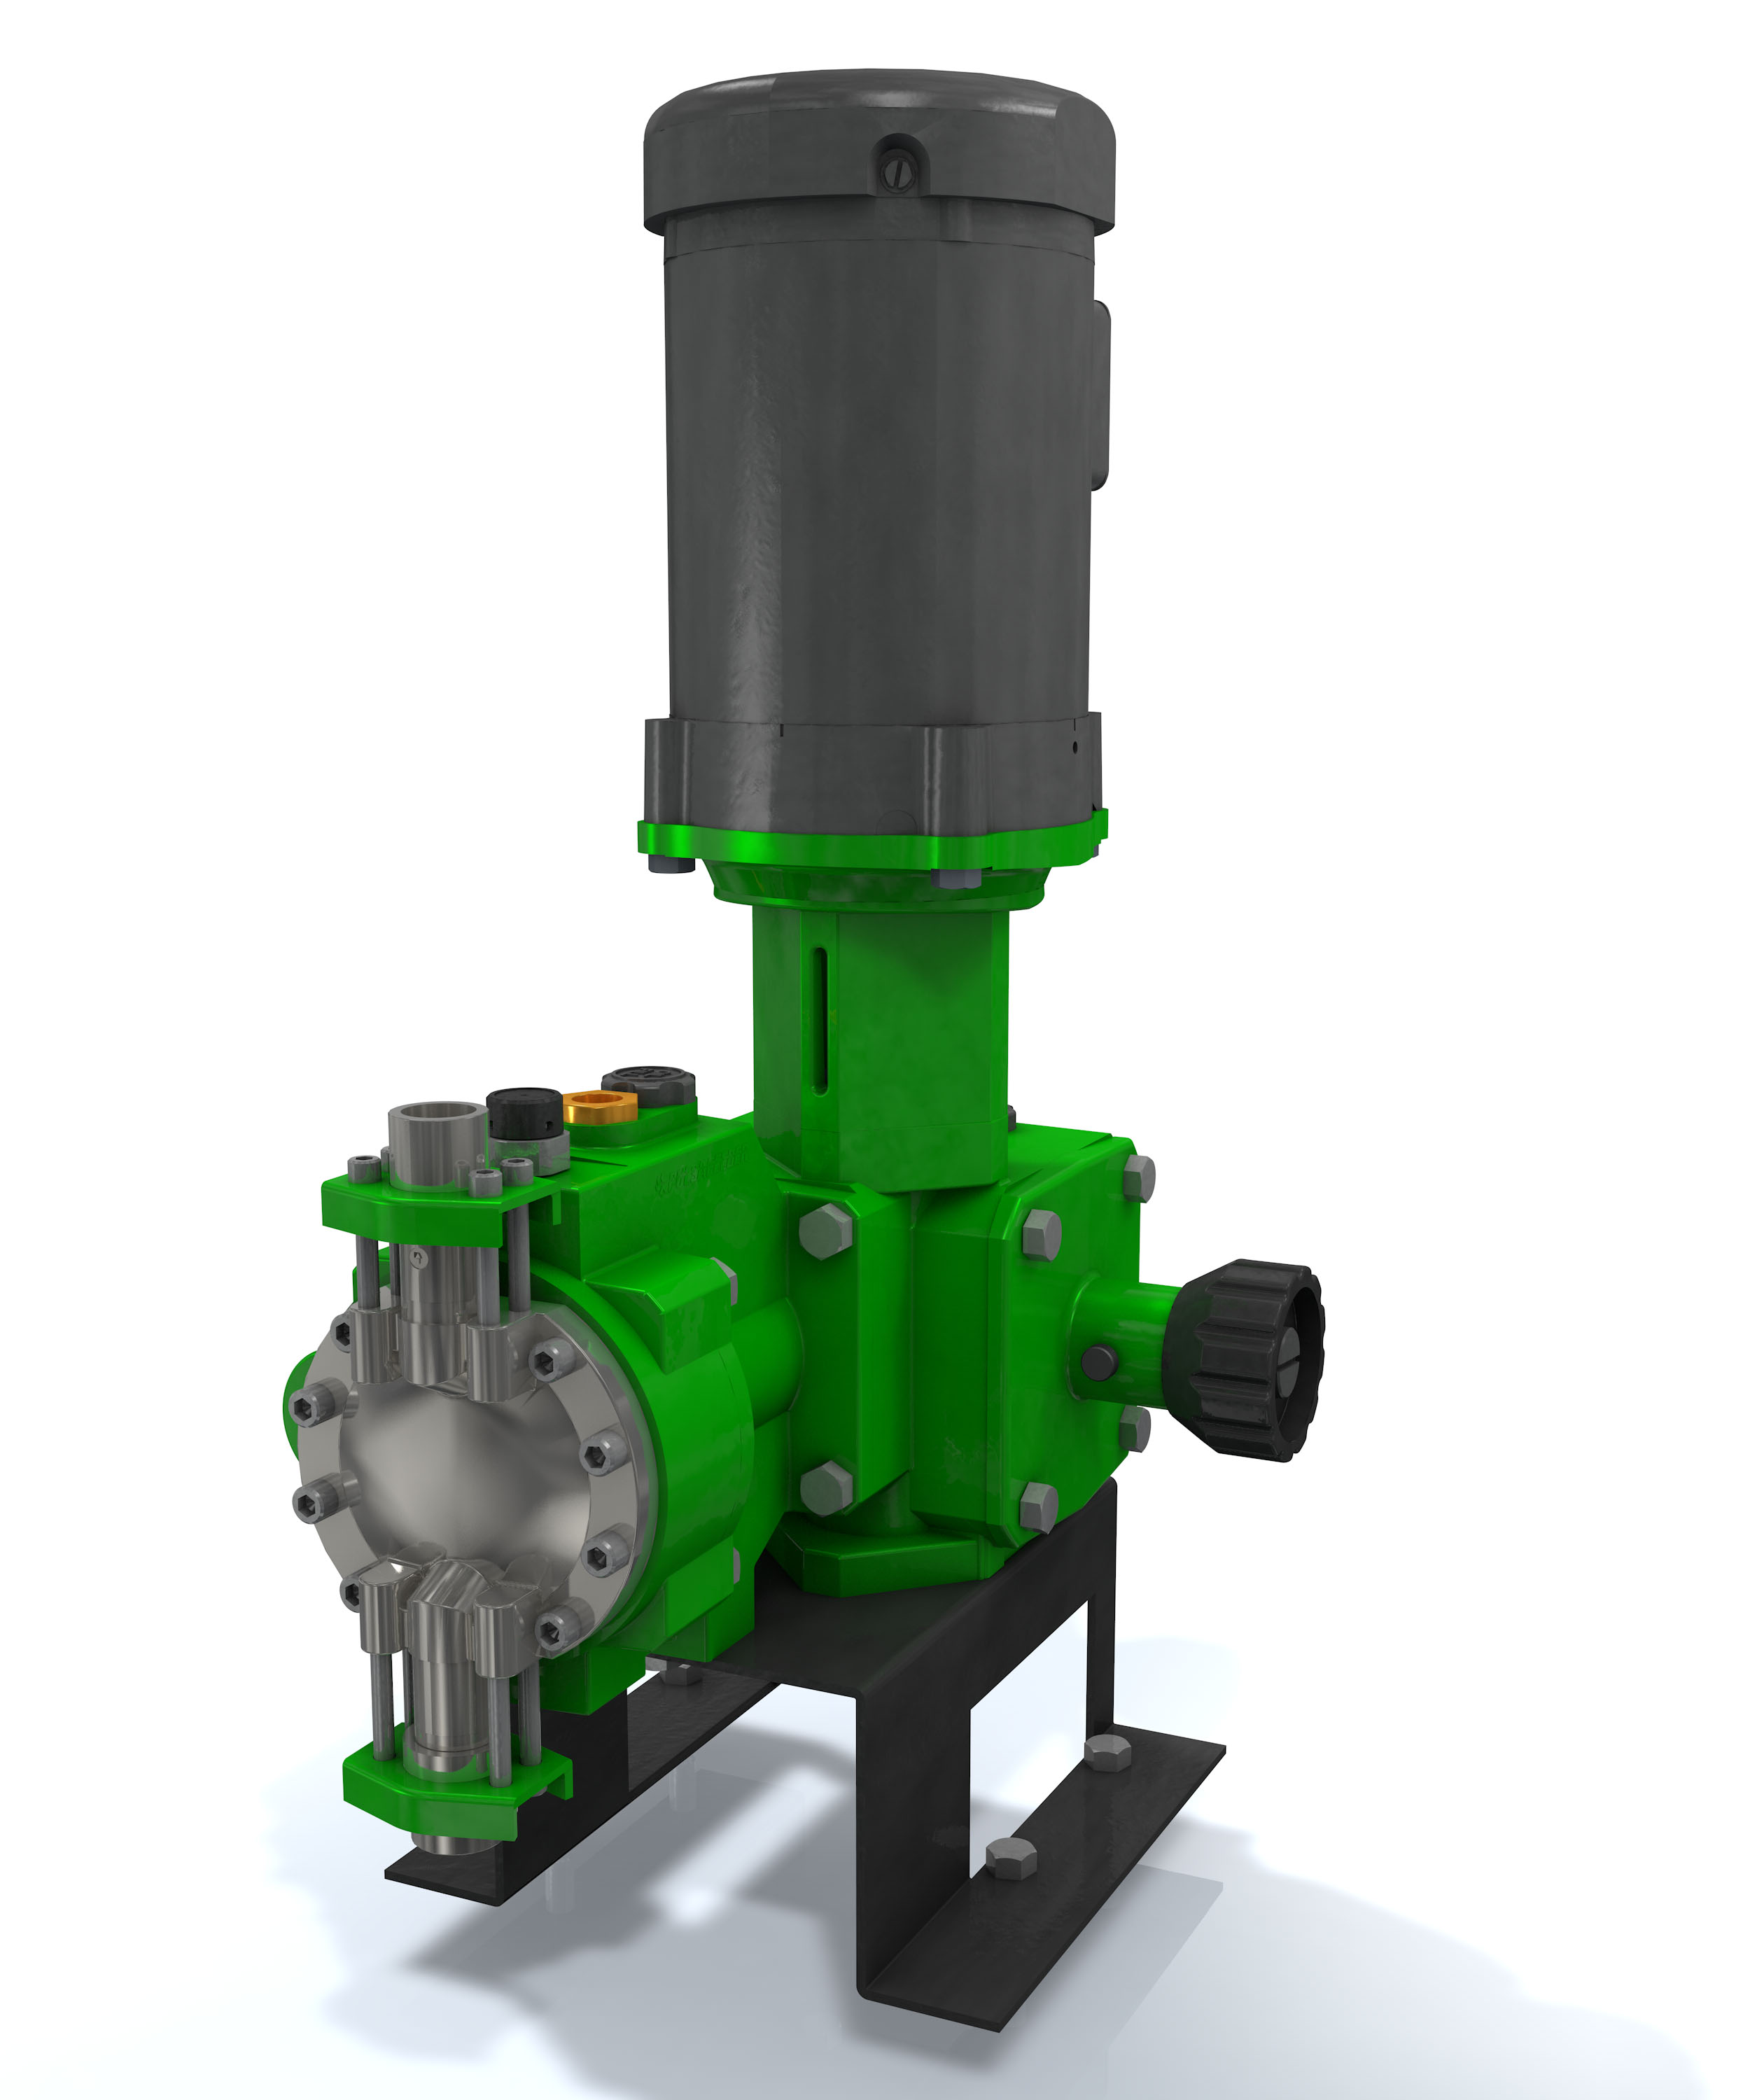 PulsaPro positive displacement reciprocating metering pumps combine the high efficiency of a plunger pump with the sturdiness of a diaphragm seal to eliminate leakage. (Source: Pulsefeeder)